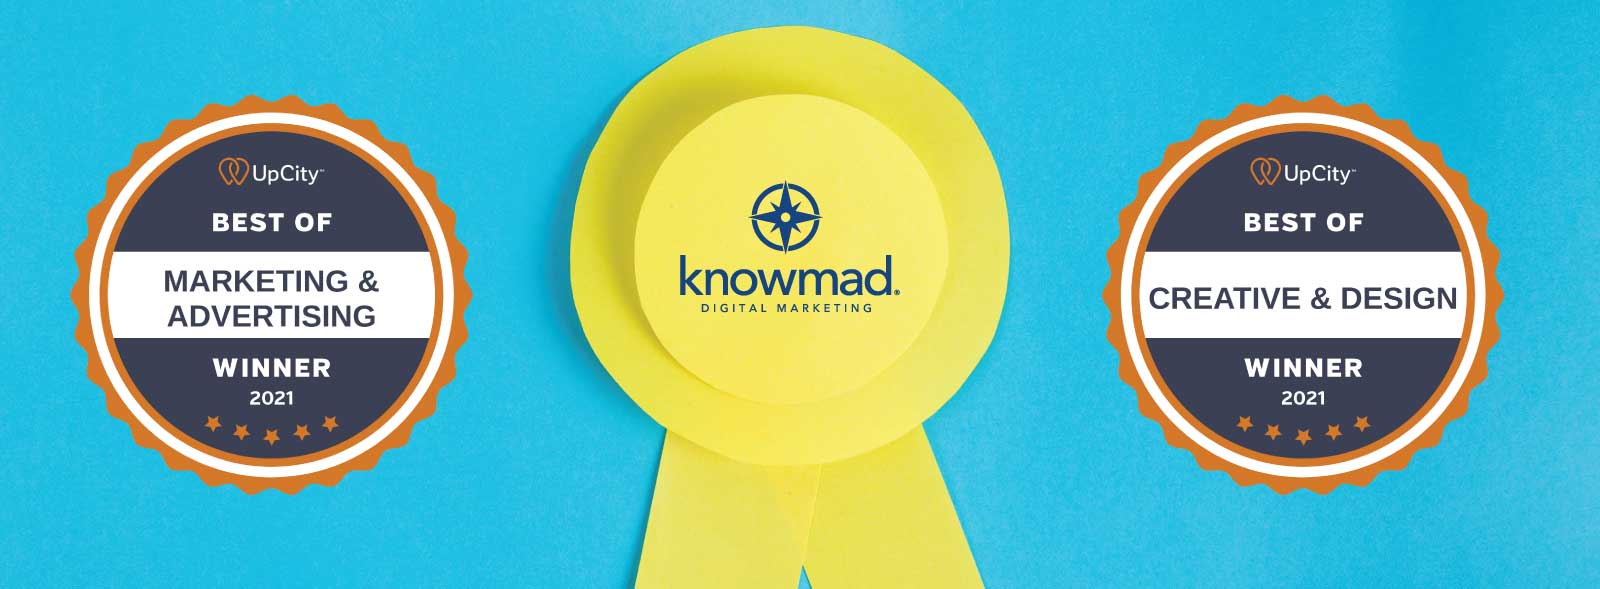 2021 Best of Creative Design and Marketing UpCity Award | Knowmad